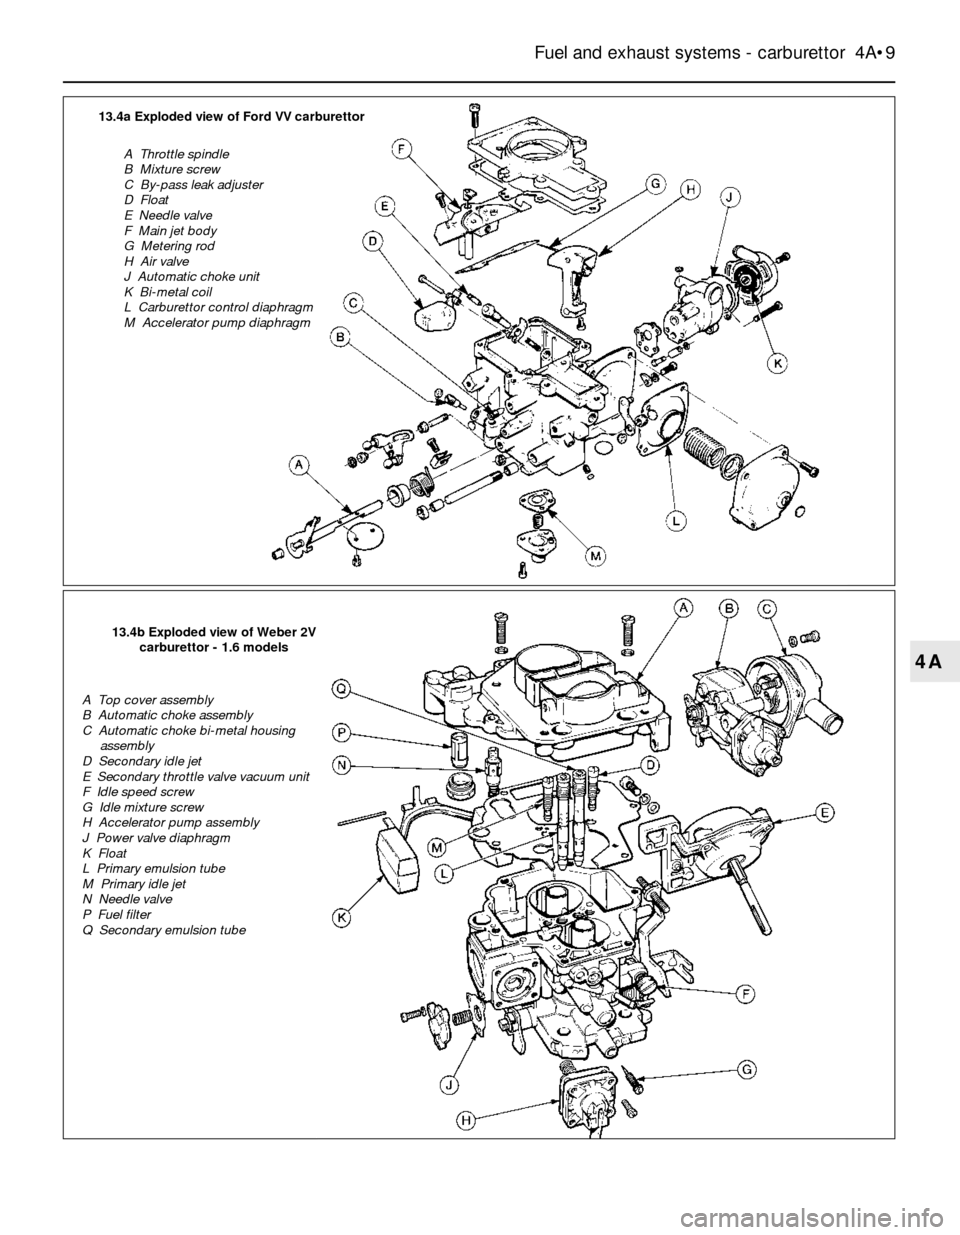 FORD SIERRA 1985 1.G Fuel And Exhaust Systems Carburettor Workshop Manual Fuel and exhaust systems - carburettor  4A•9
4A
13.4a Exploded view of Ford VV carburettor
A  Throttle spindle
B  Mixture screw
C  By-pass leak adjuster
D  Float
E  Needle valve
F  Main jet body
G  